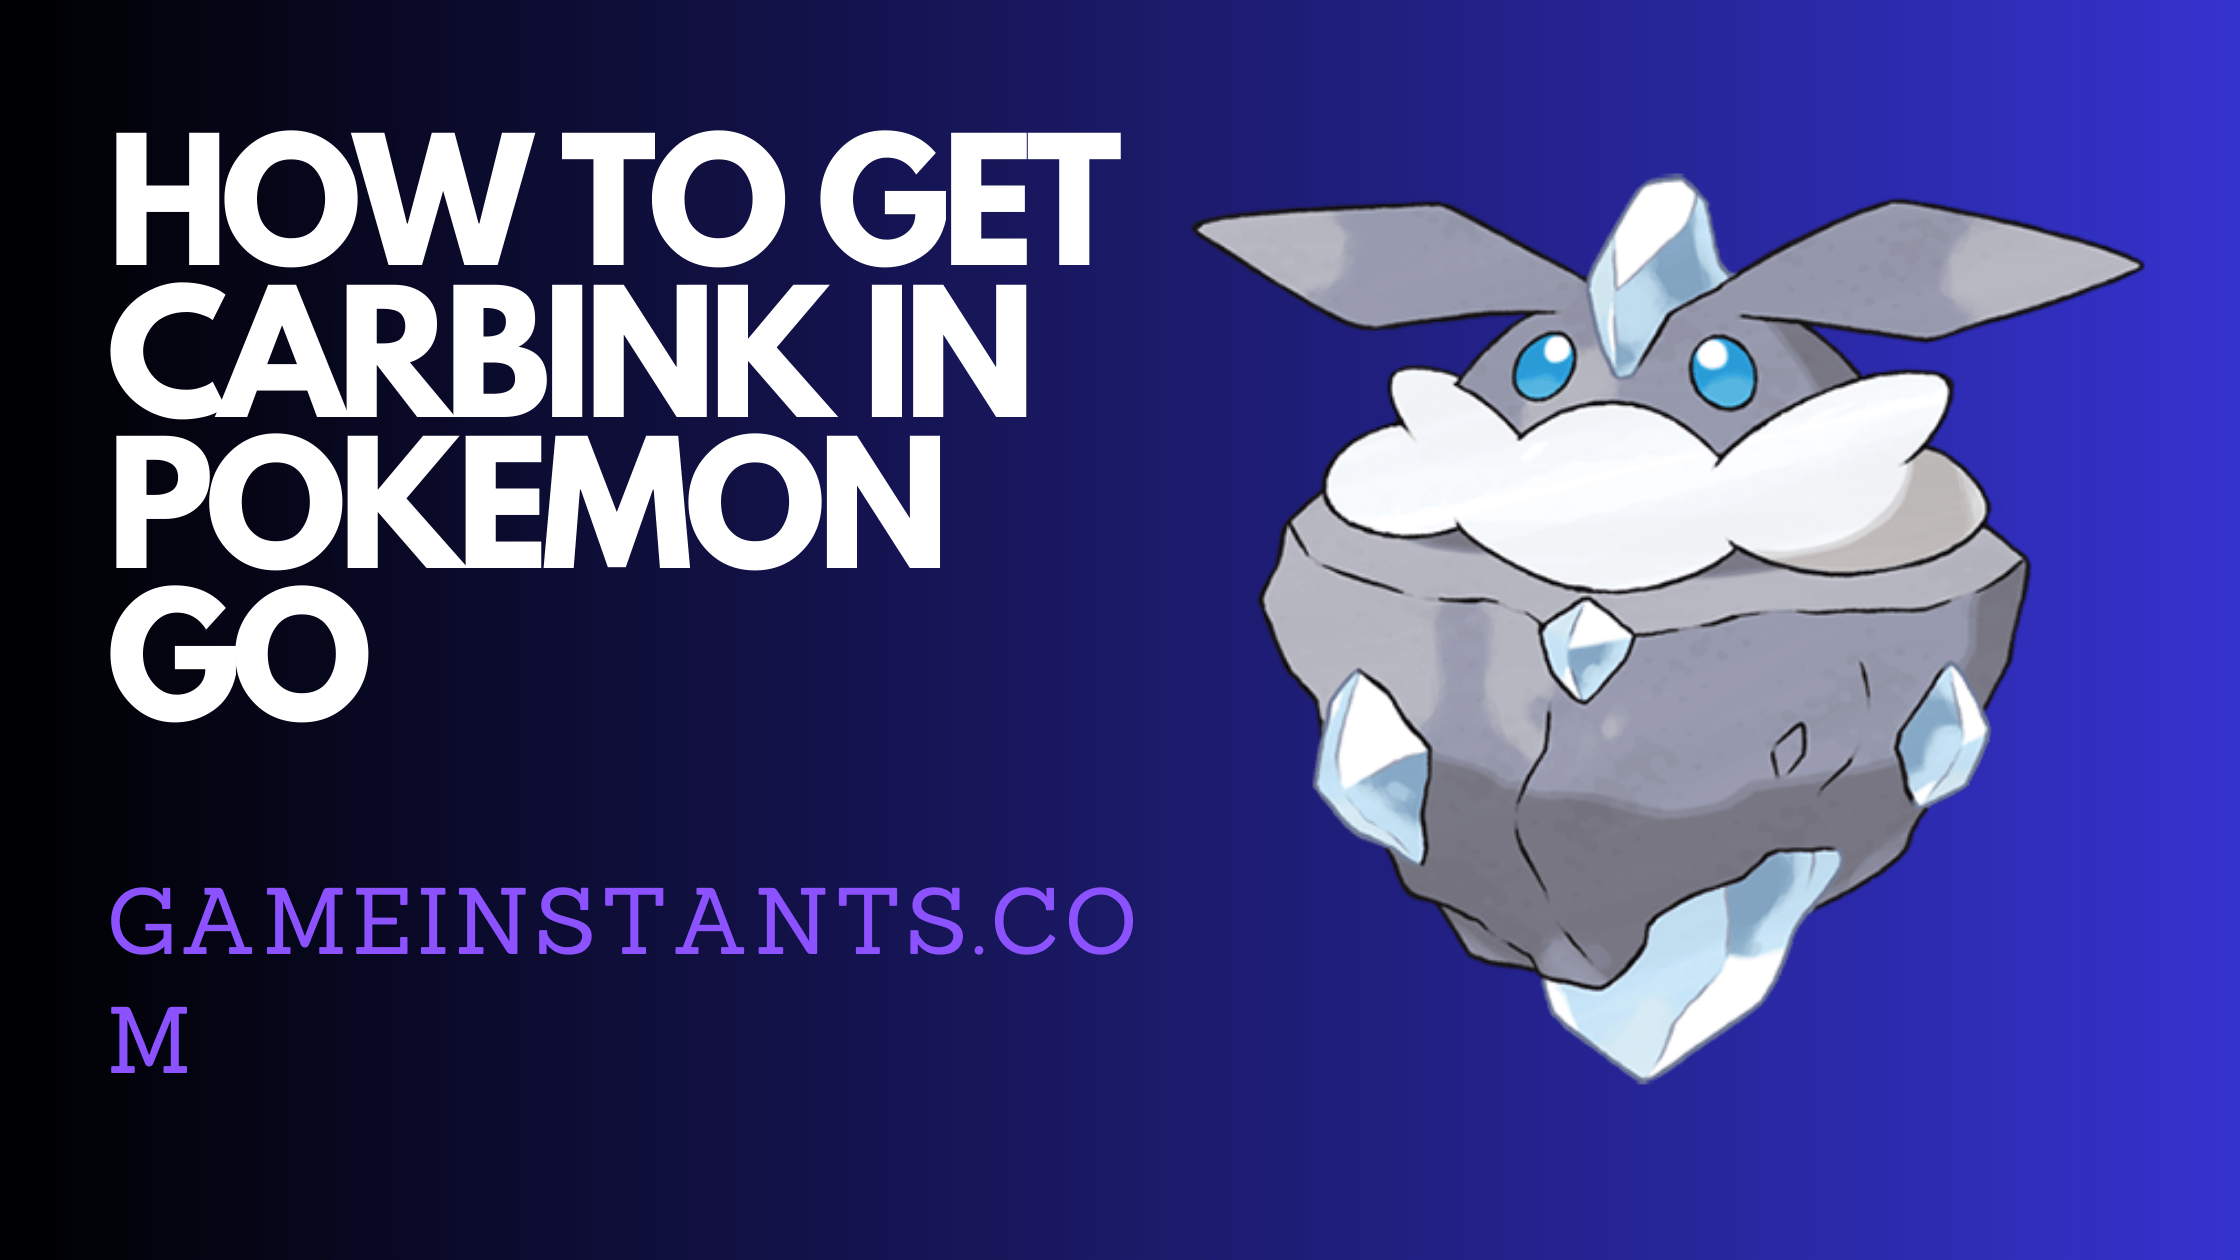 How To Get Carbink in Pokemon Go